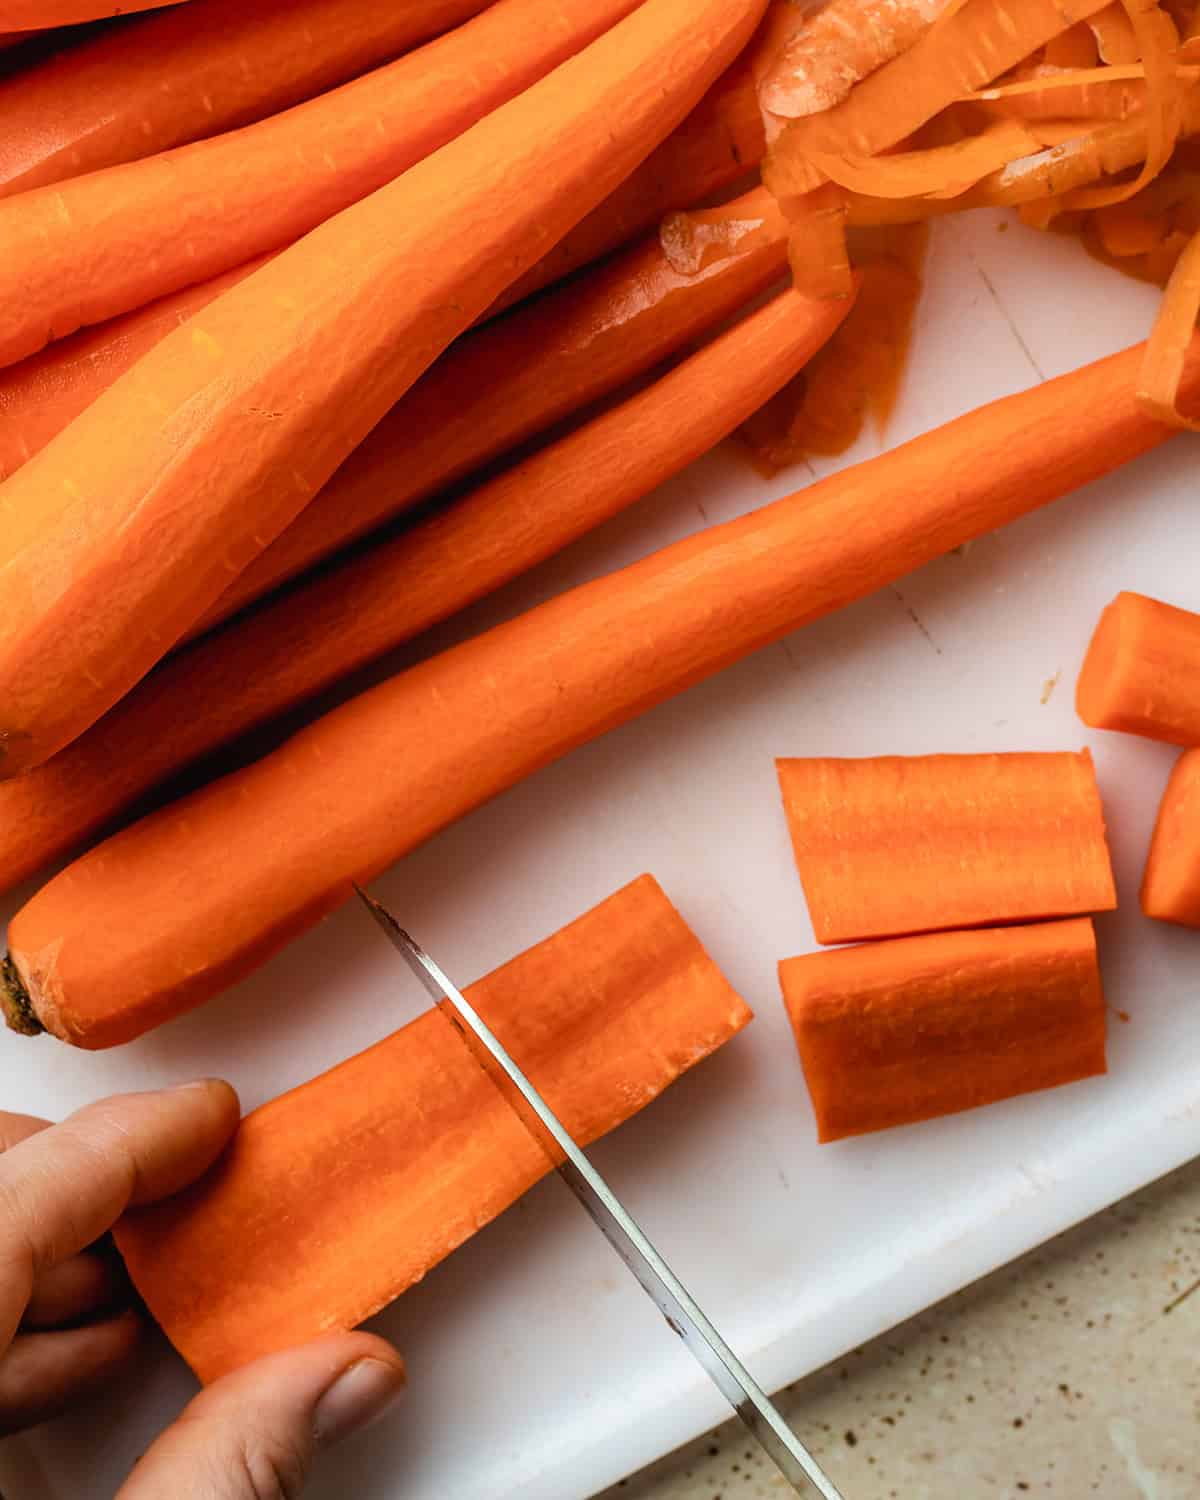 How to Make Baby Food Carrots  - cutting carrots